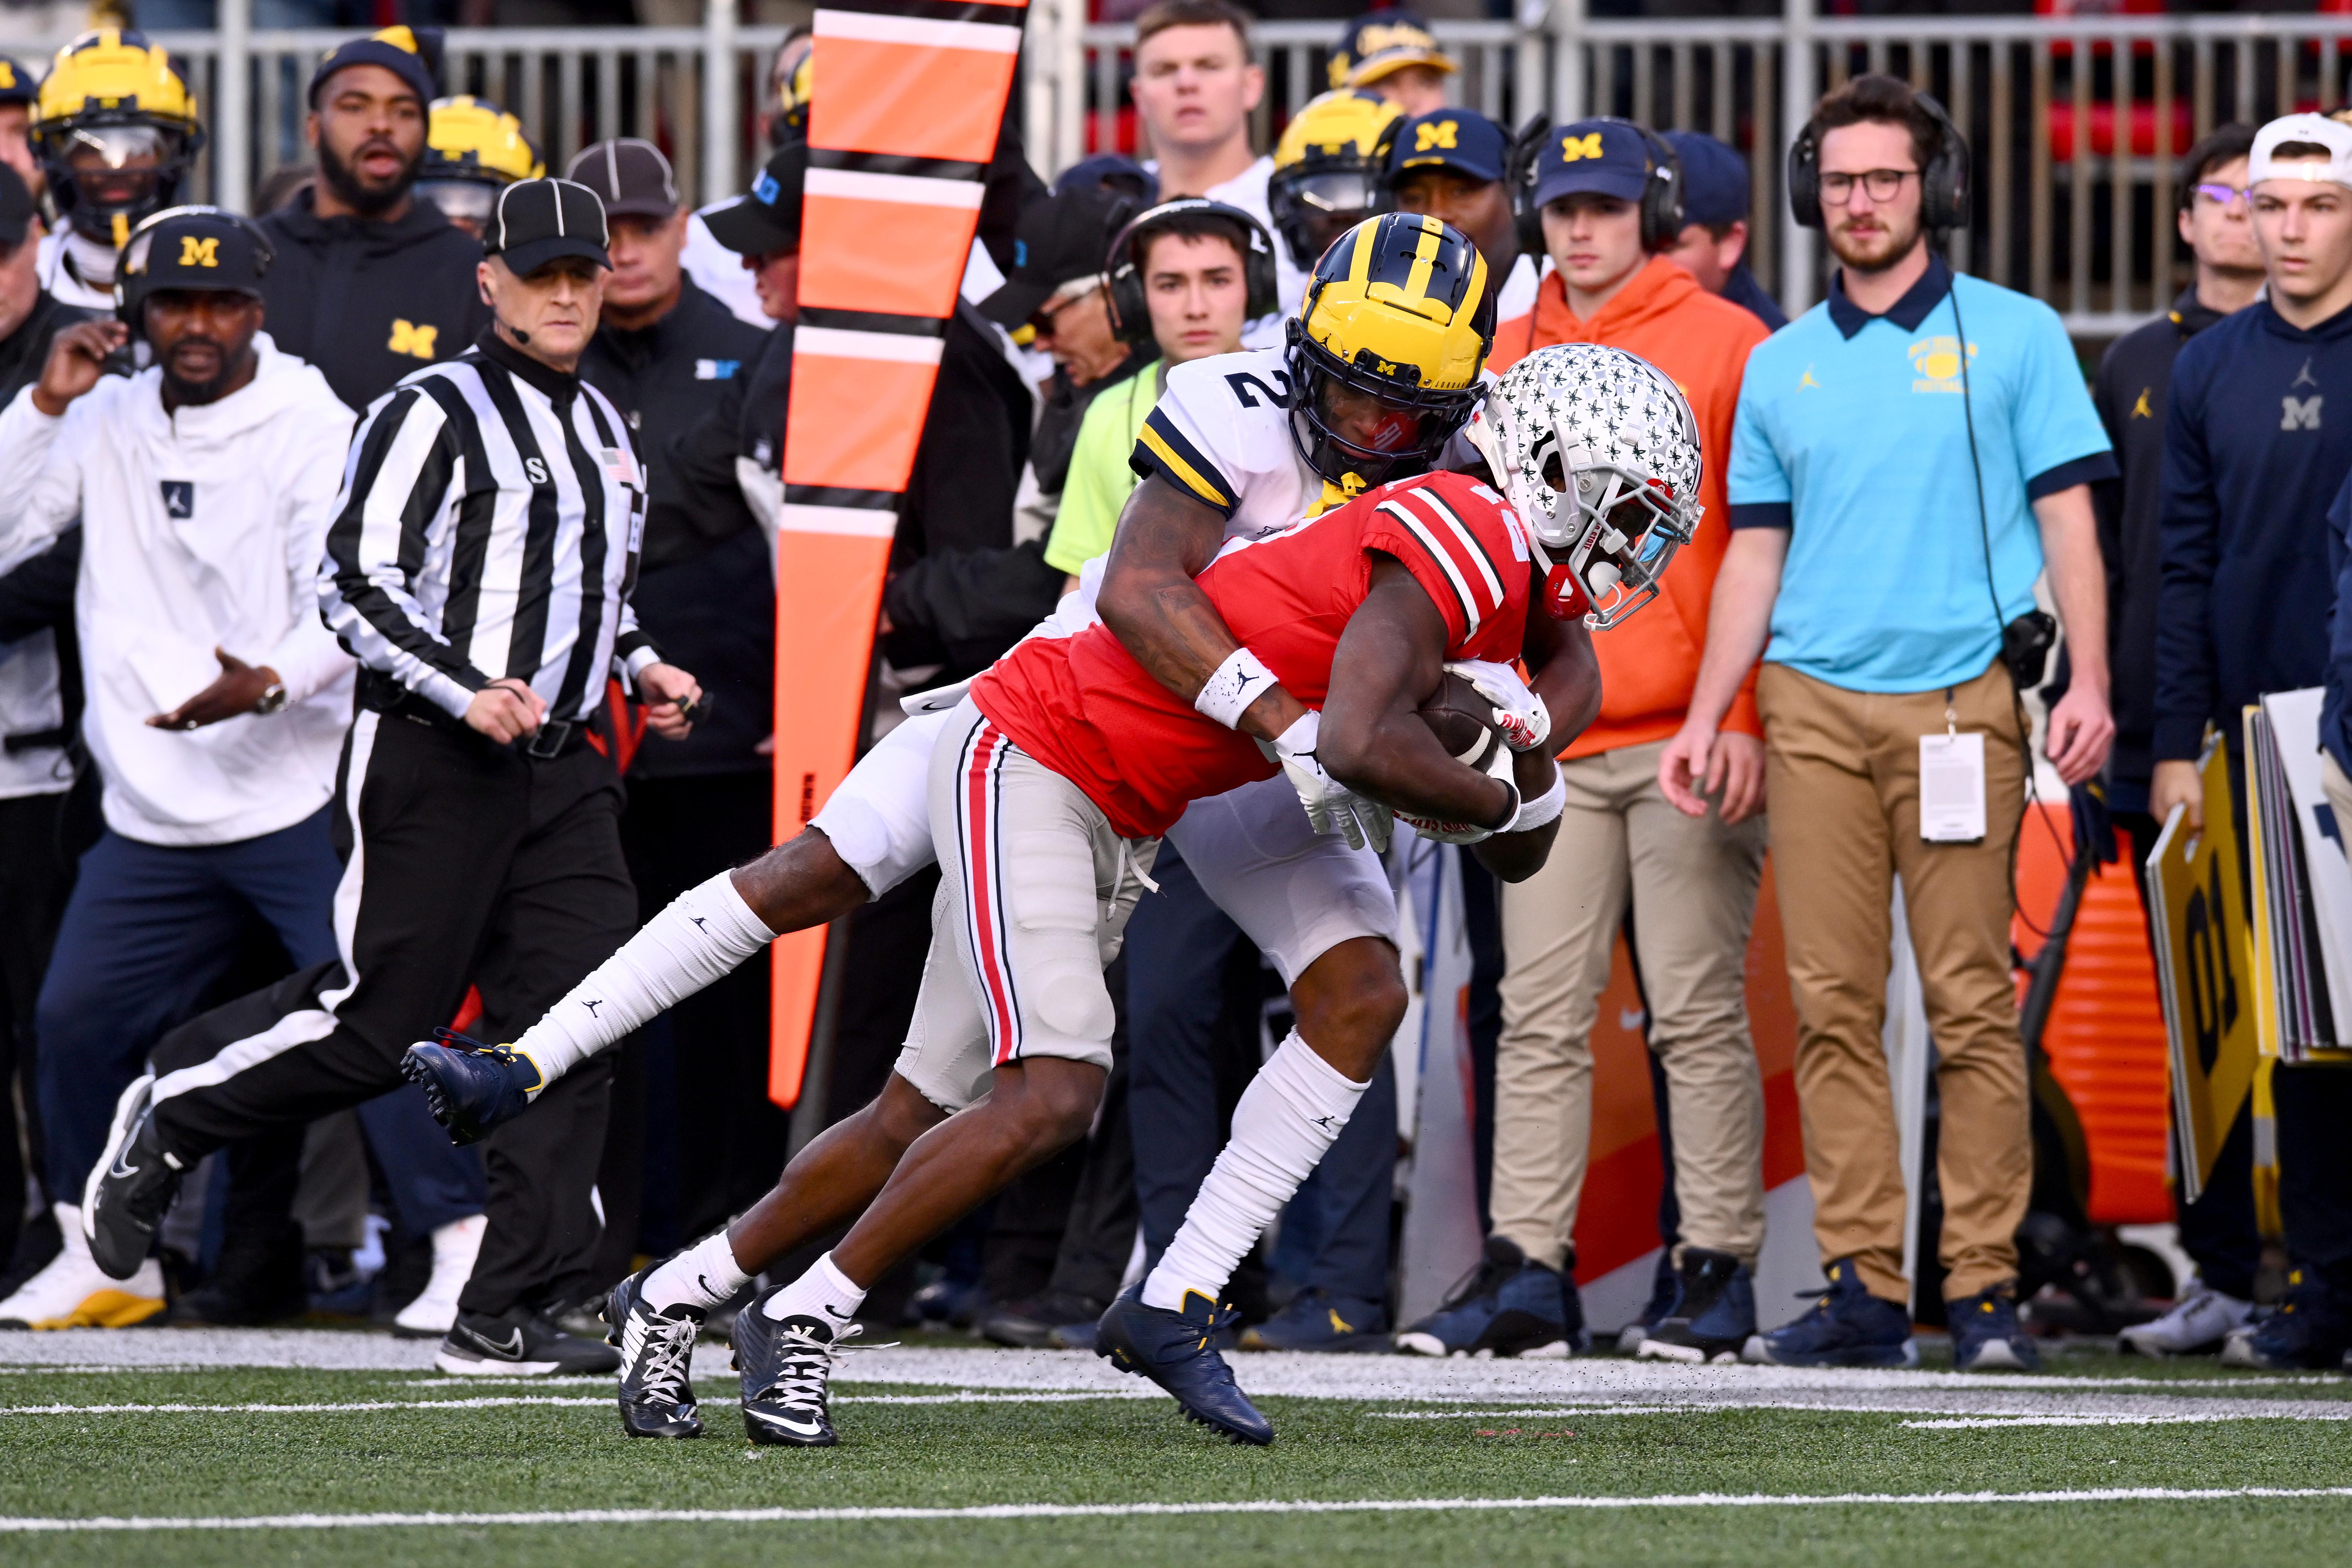 Johnson tackles Harrison Jr., who is carrying the ball, as a ref and Michigan's coaching staff watch on the sidelines